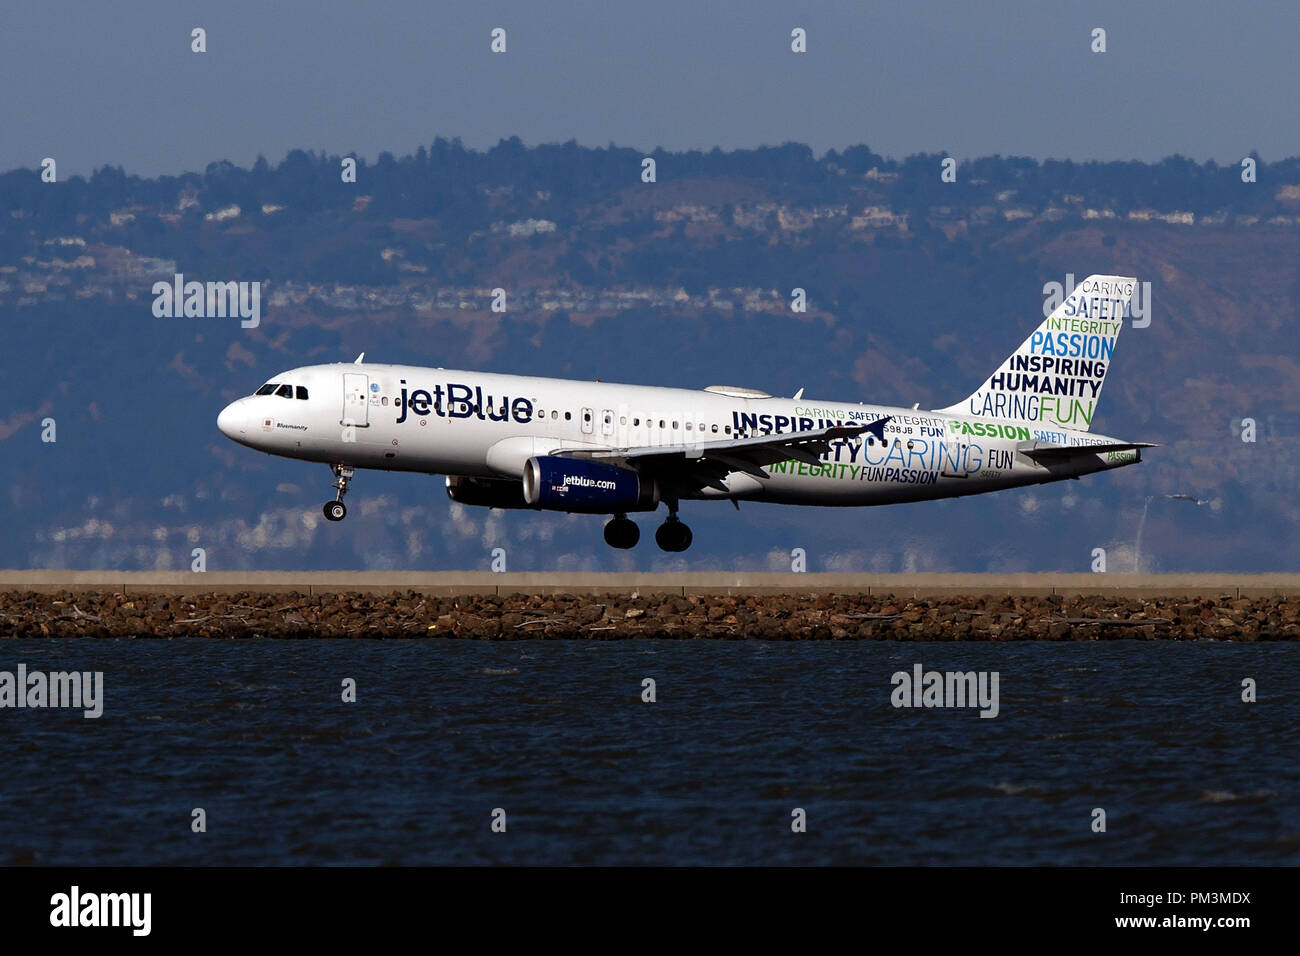 Airbus A320 232 N598jb Operated By Jetblue Airways With